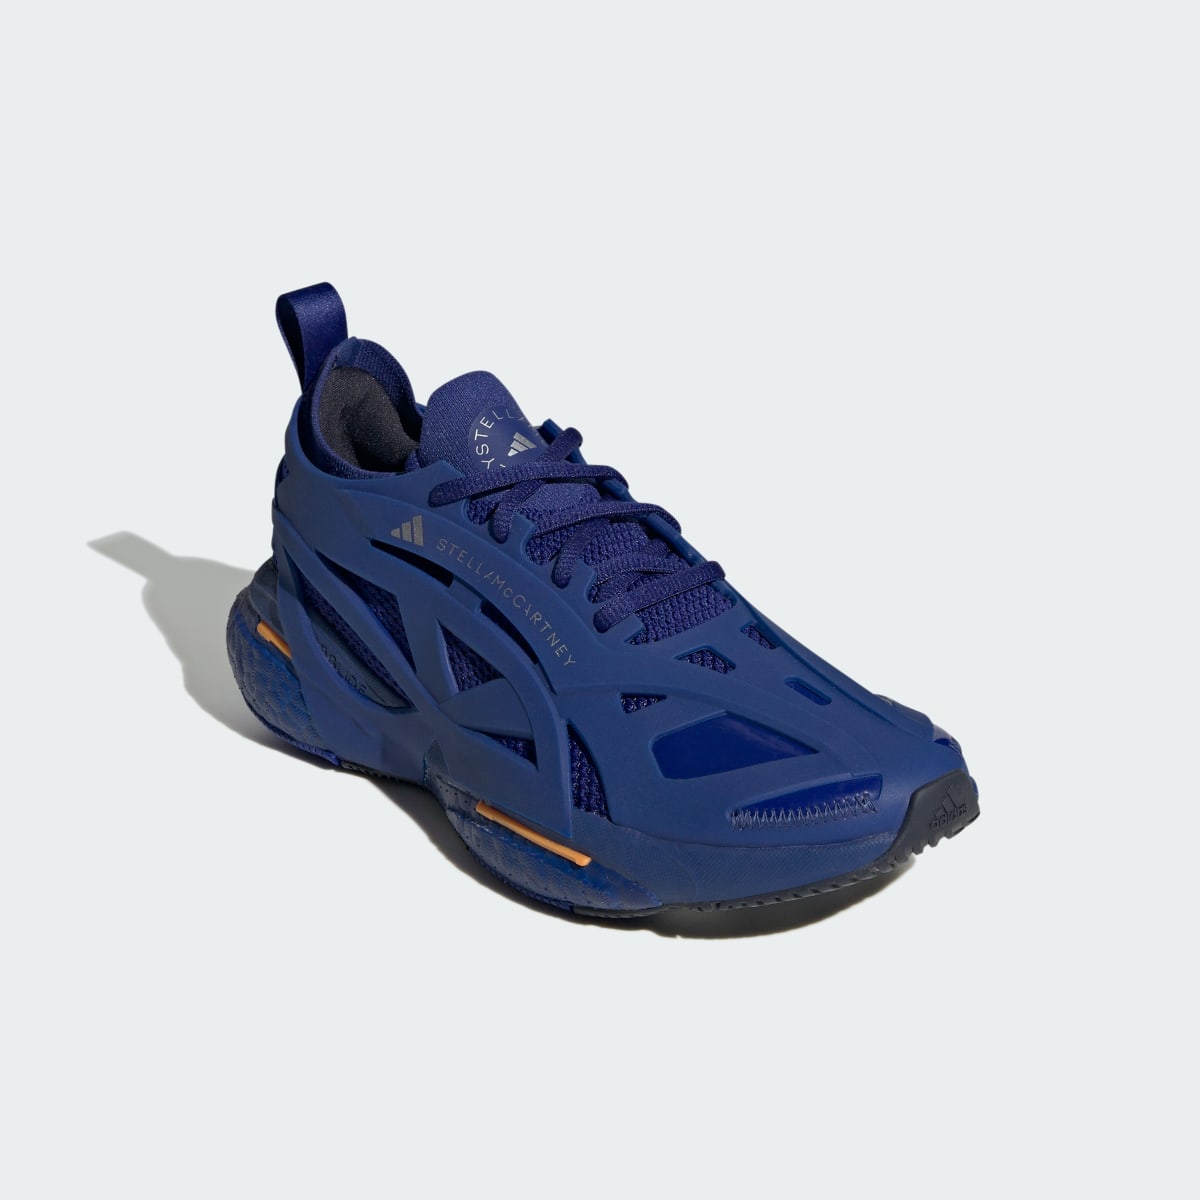 Adidas by Stella McCartney Solarglide Running Shoes. 5